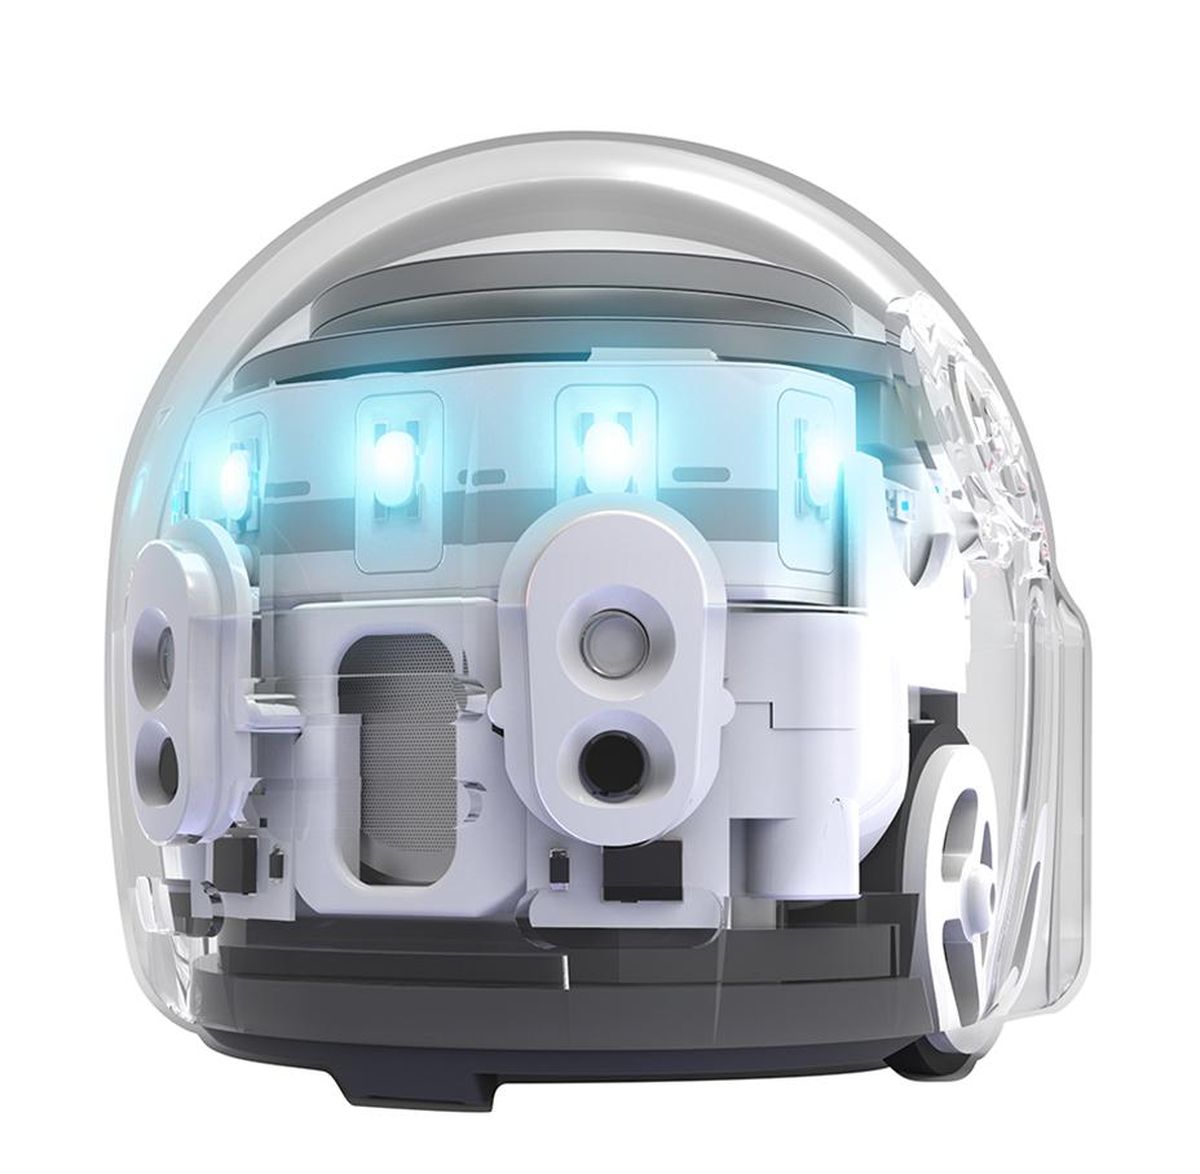 Ozobots can be used to teach children about coding, (Courtesy of Ozobots)